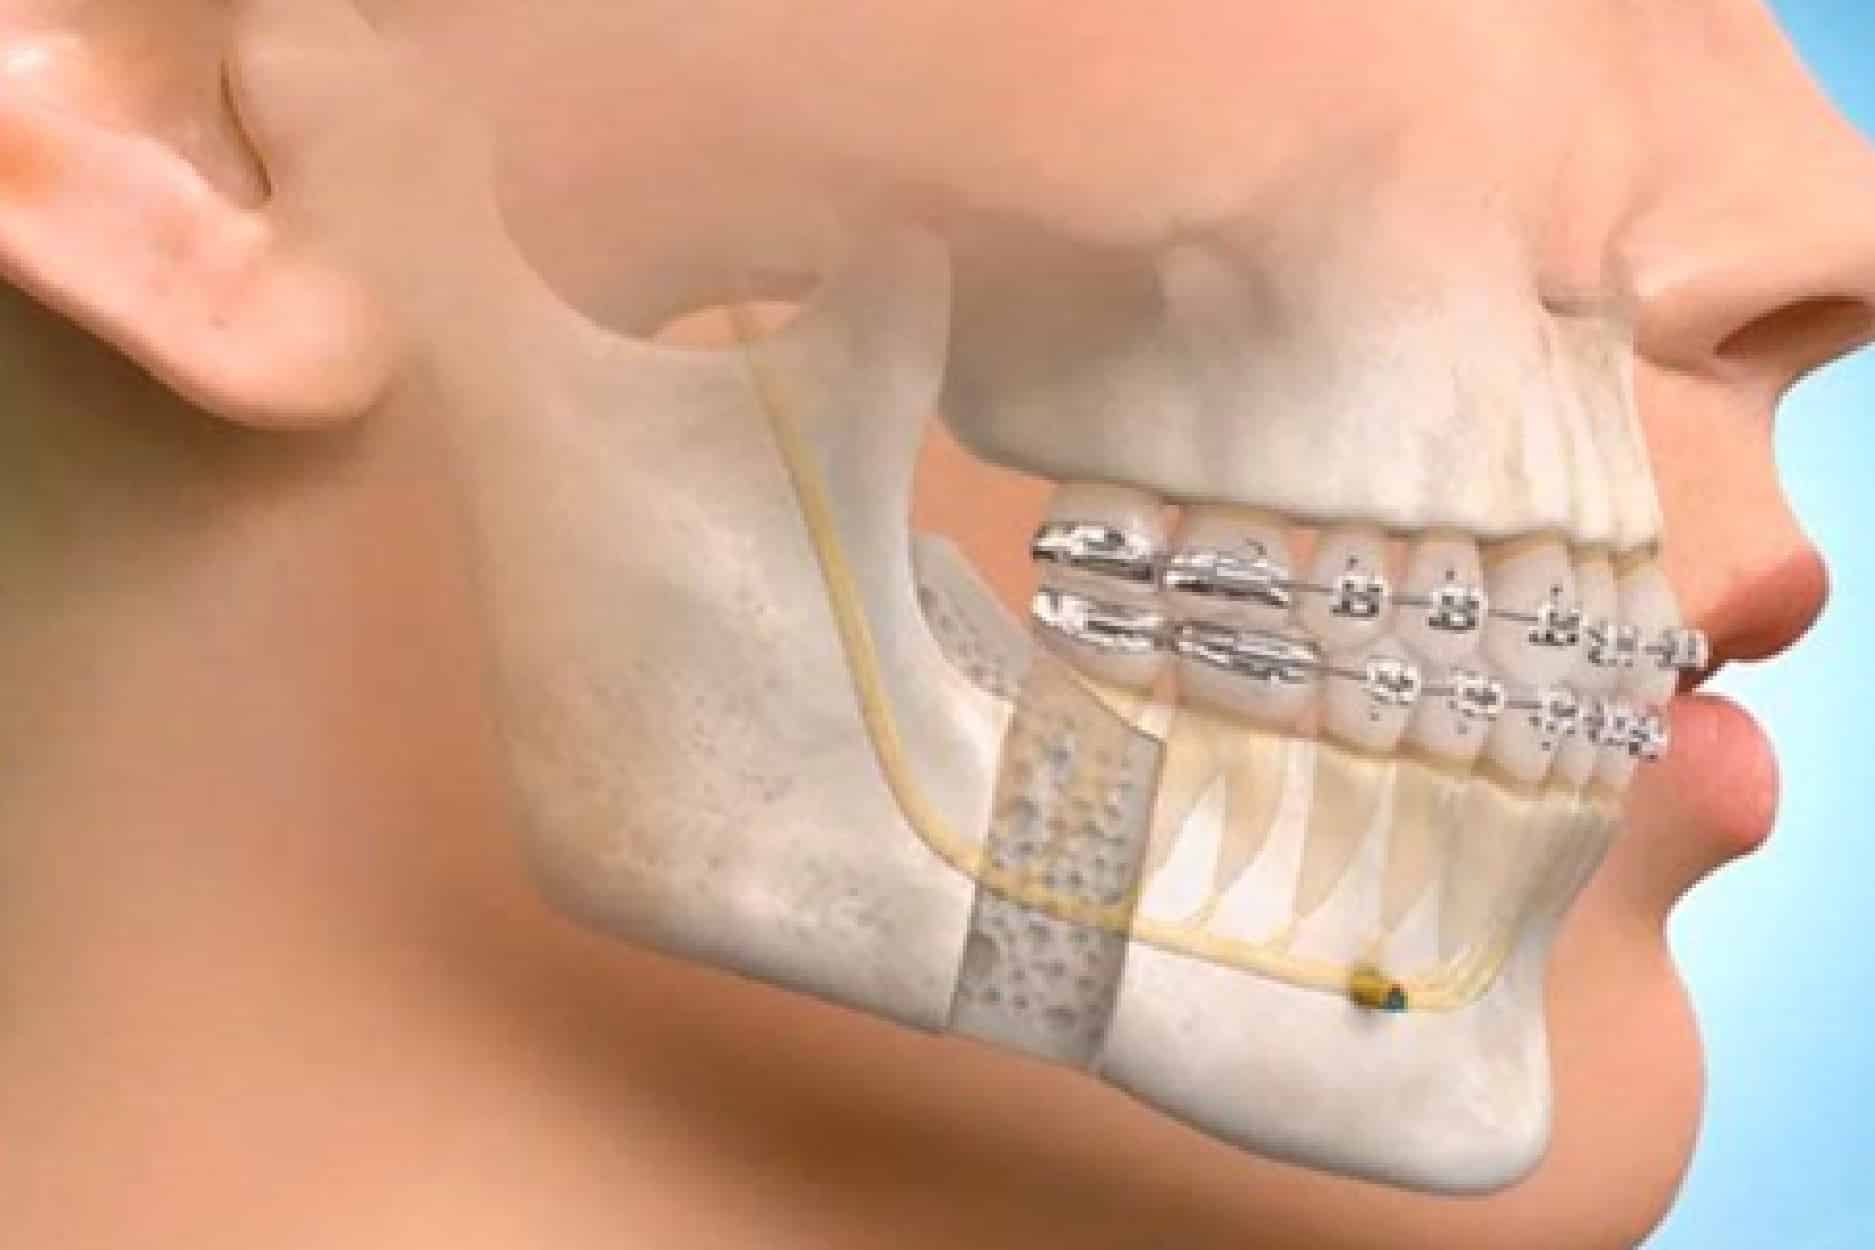 Why Should You Go To An Oral & Maxillofacial Surgeon For Your Dental Complications?